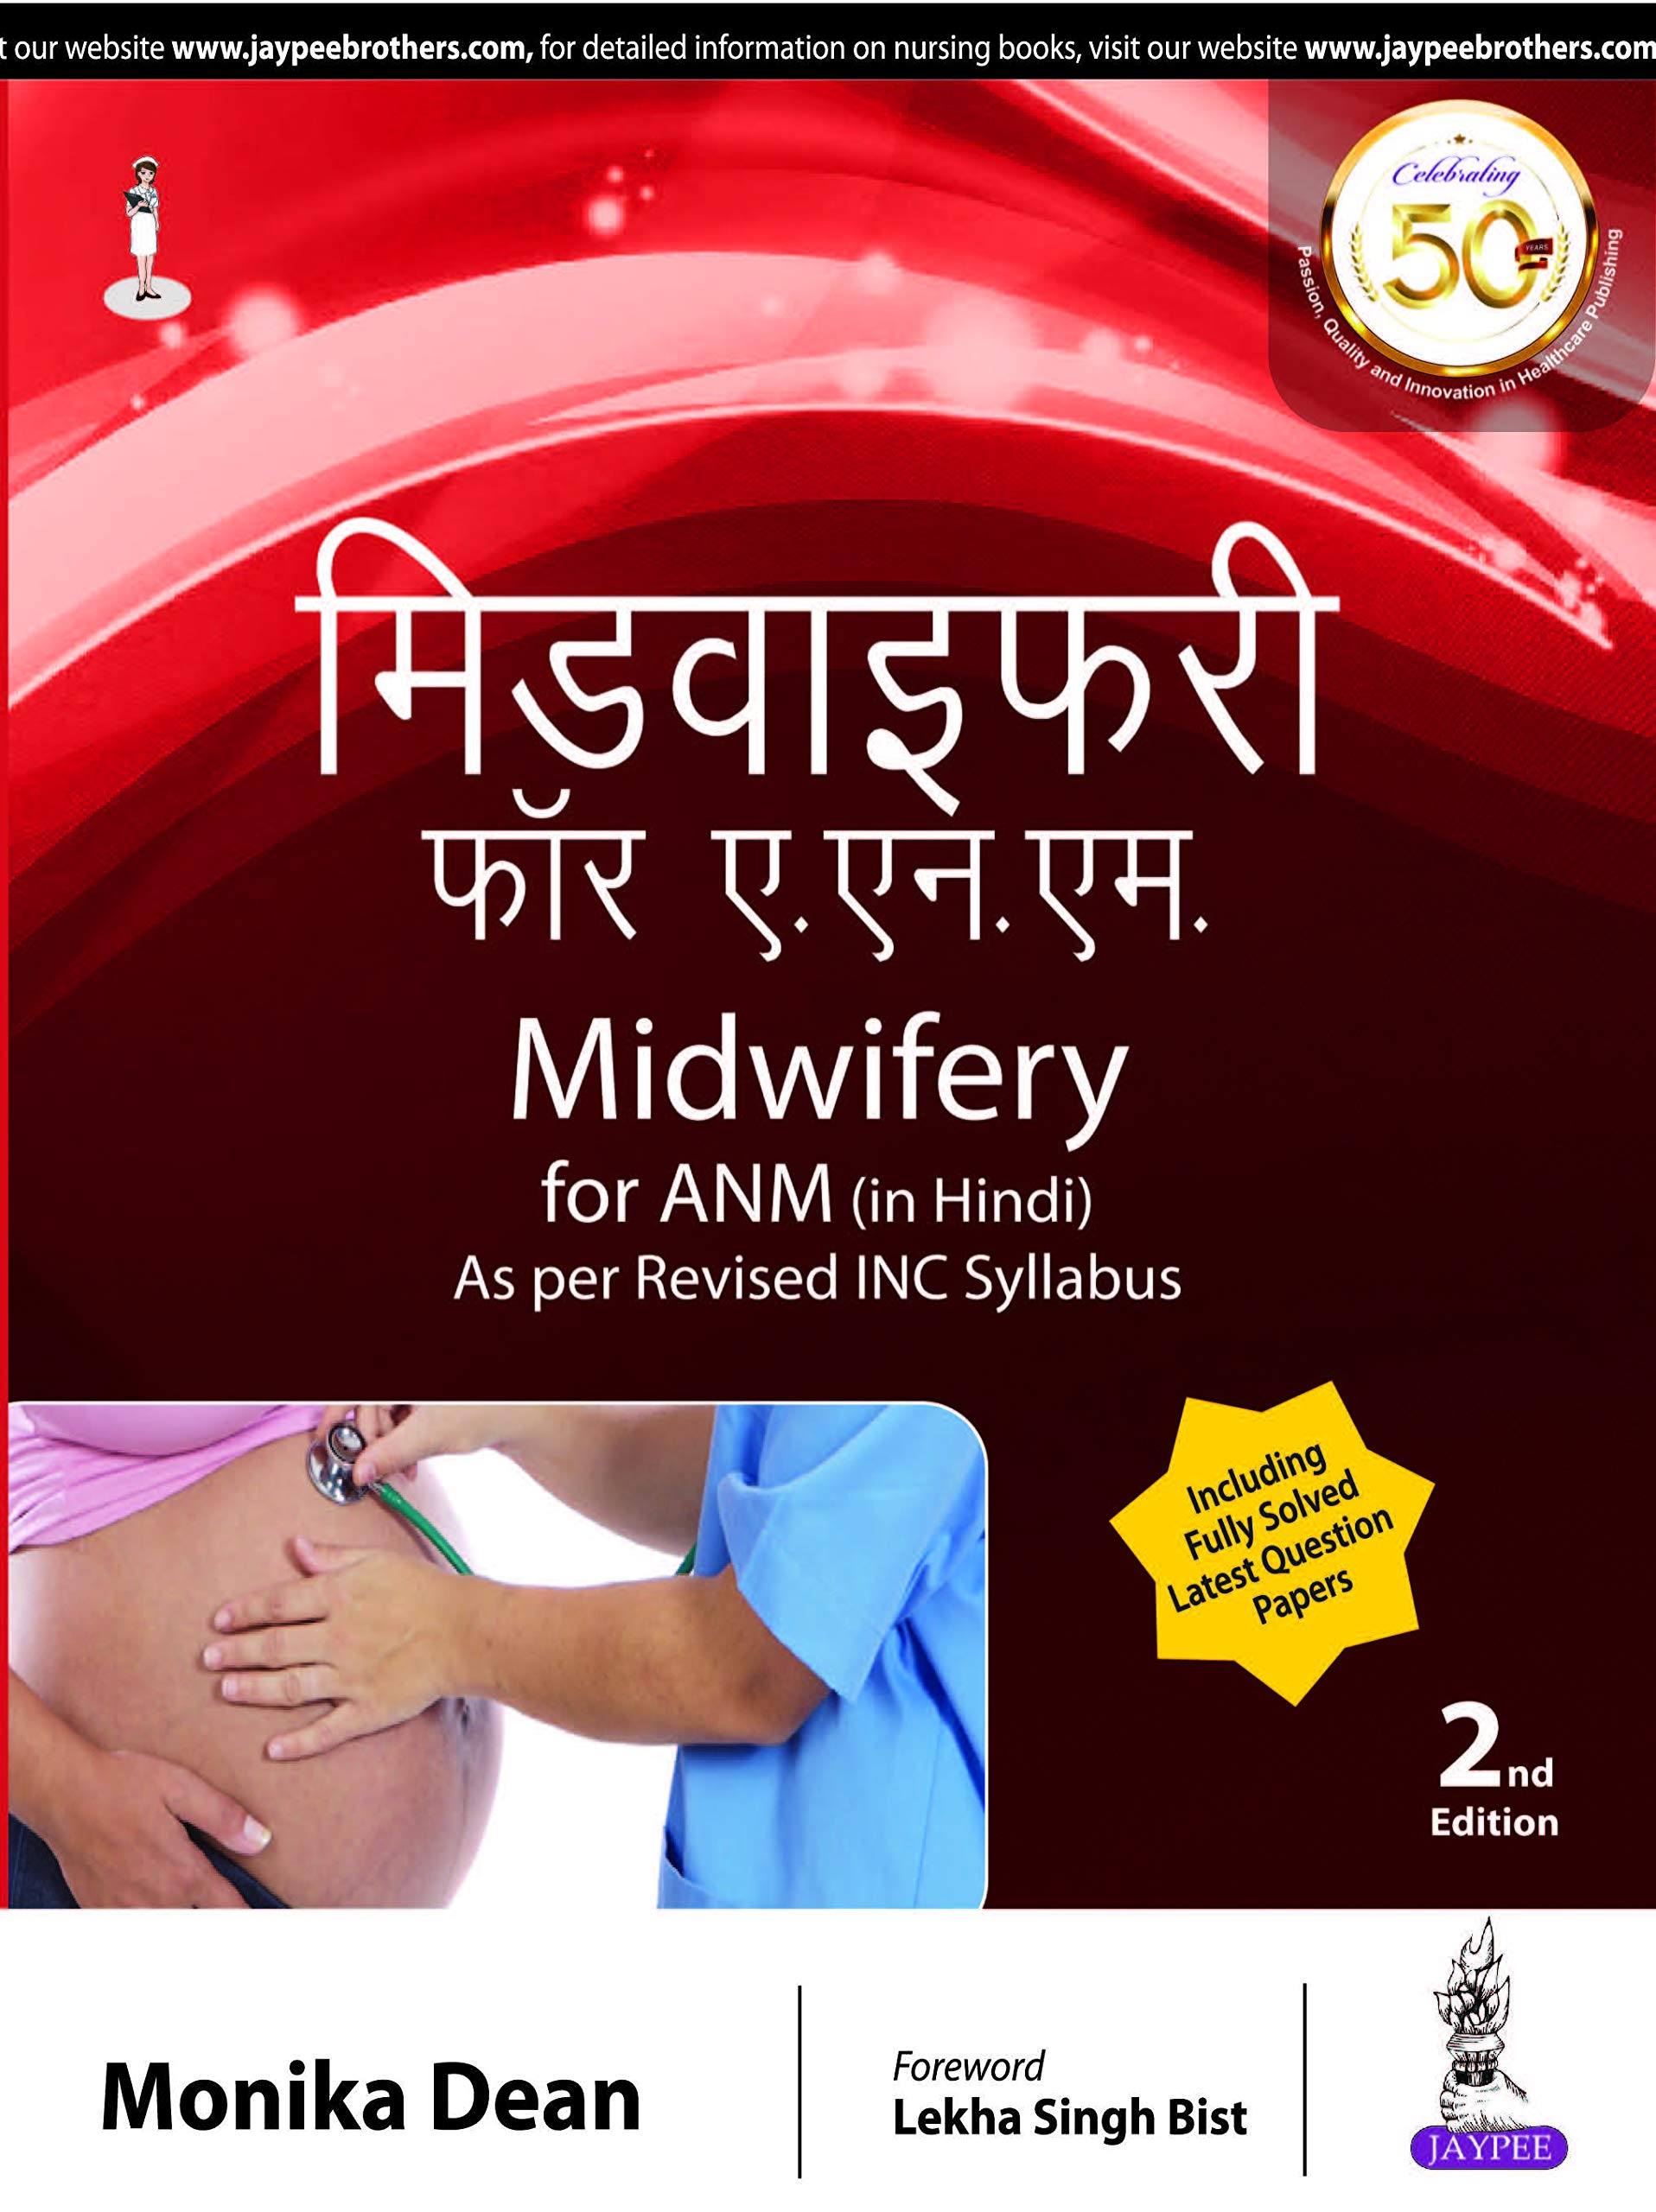 midwifery-for-anm-in-hindi-as-per-revised-inc-syllabus